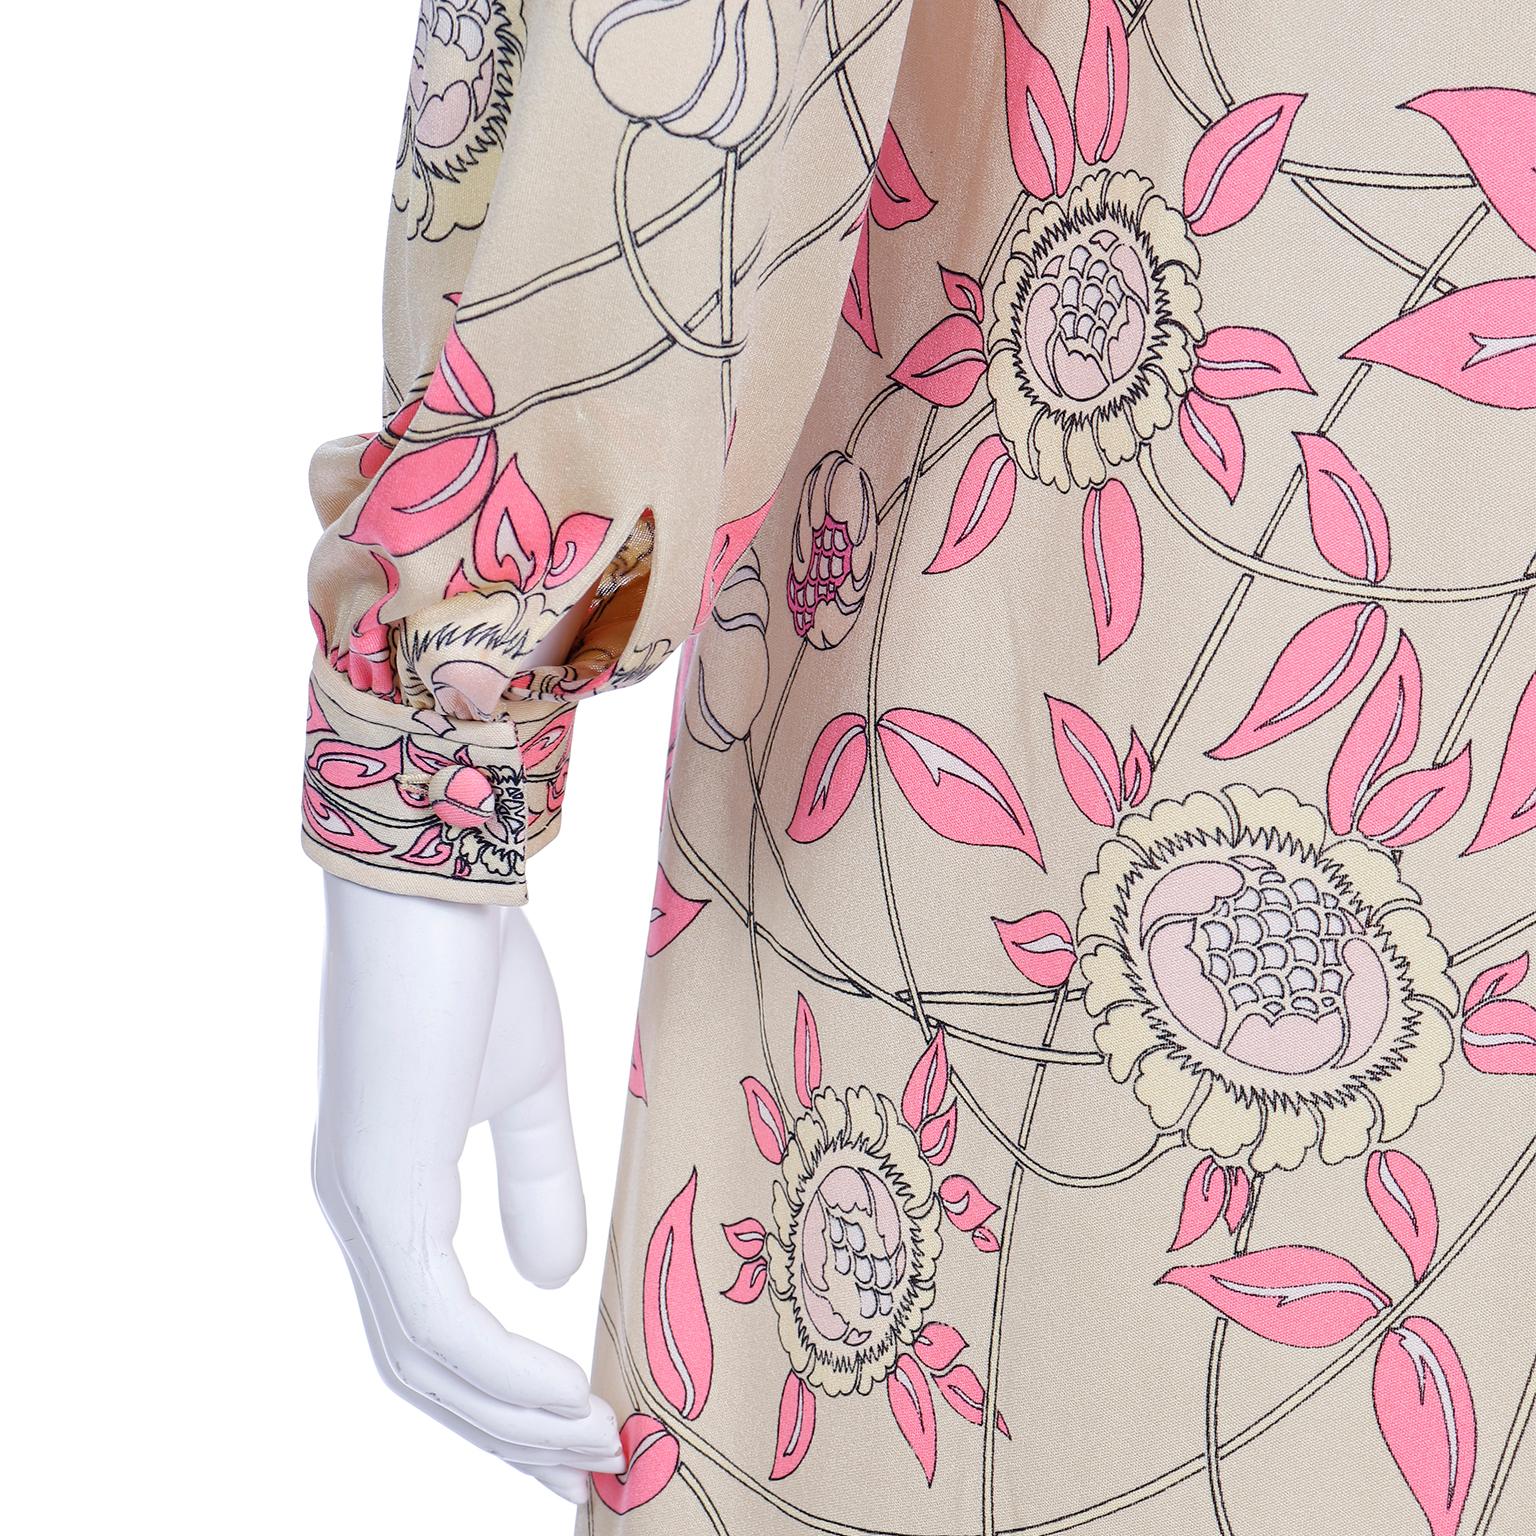 1970s Vintage Emilio Pucci Silk Jersey Pale Yellow & Pink Floral Dress For Sale 3